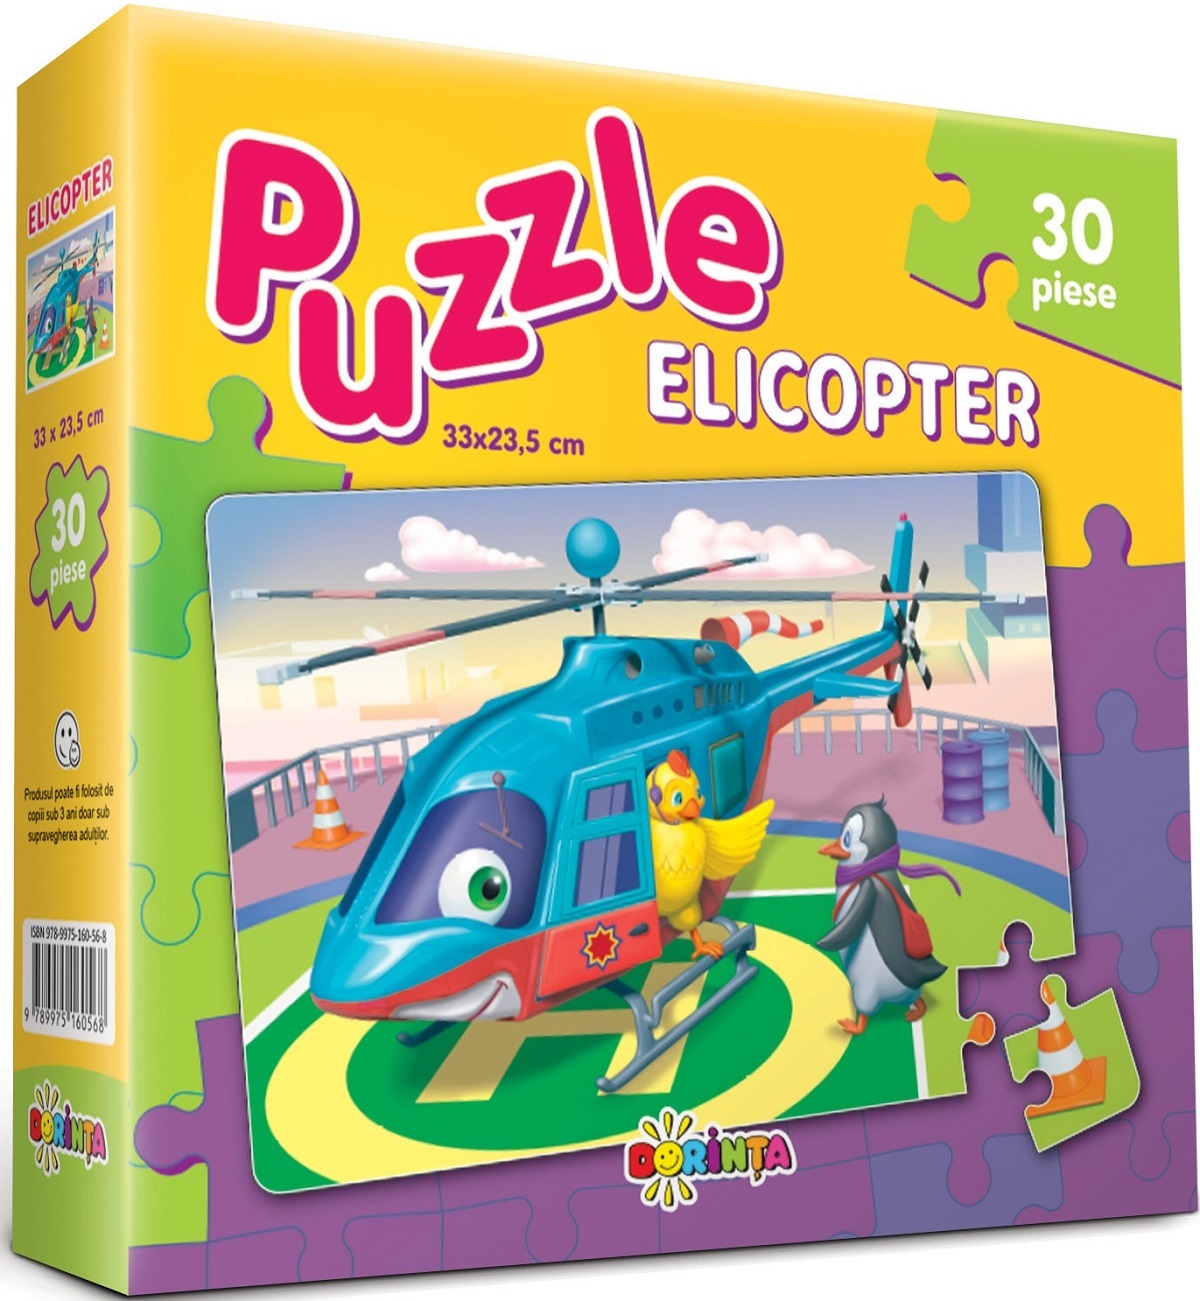 Puzzle 30. Elicopter